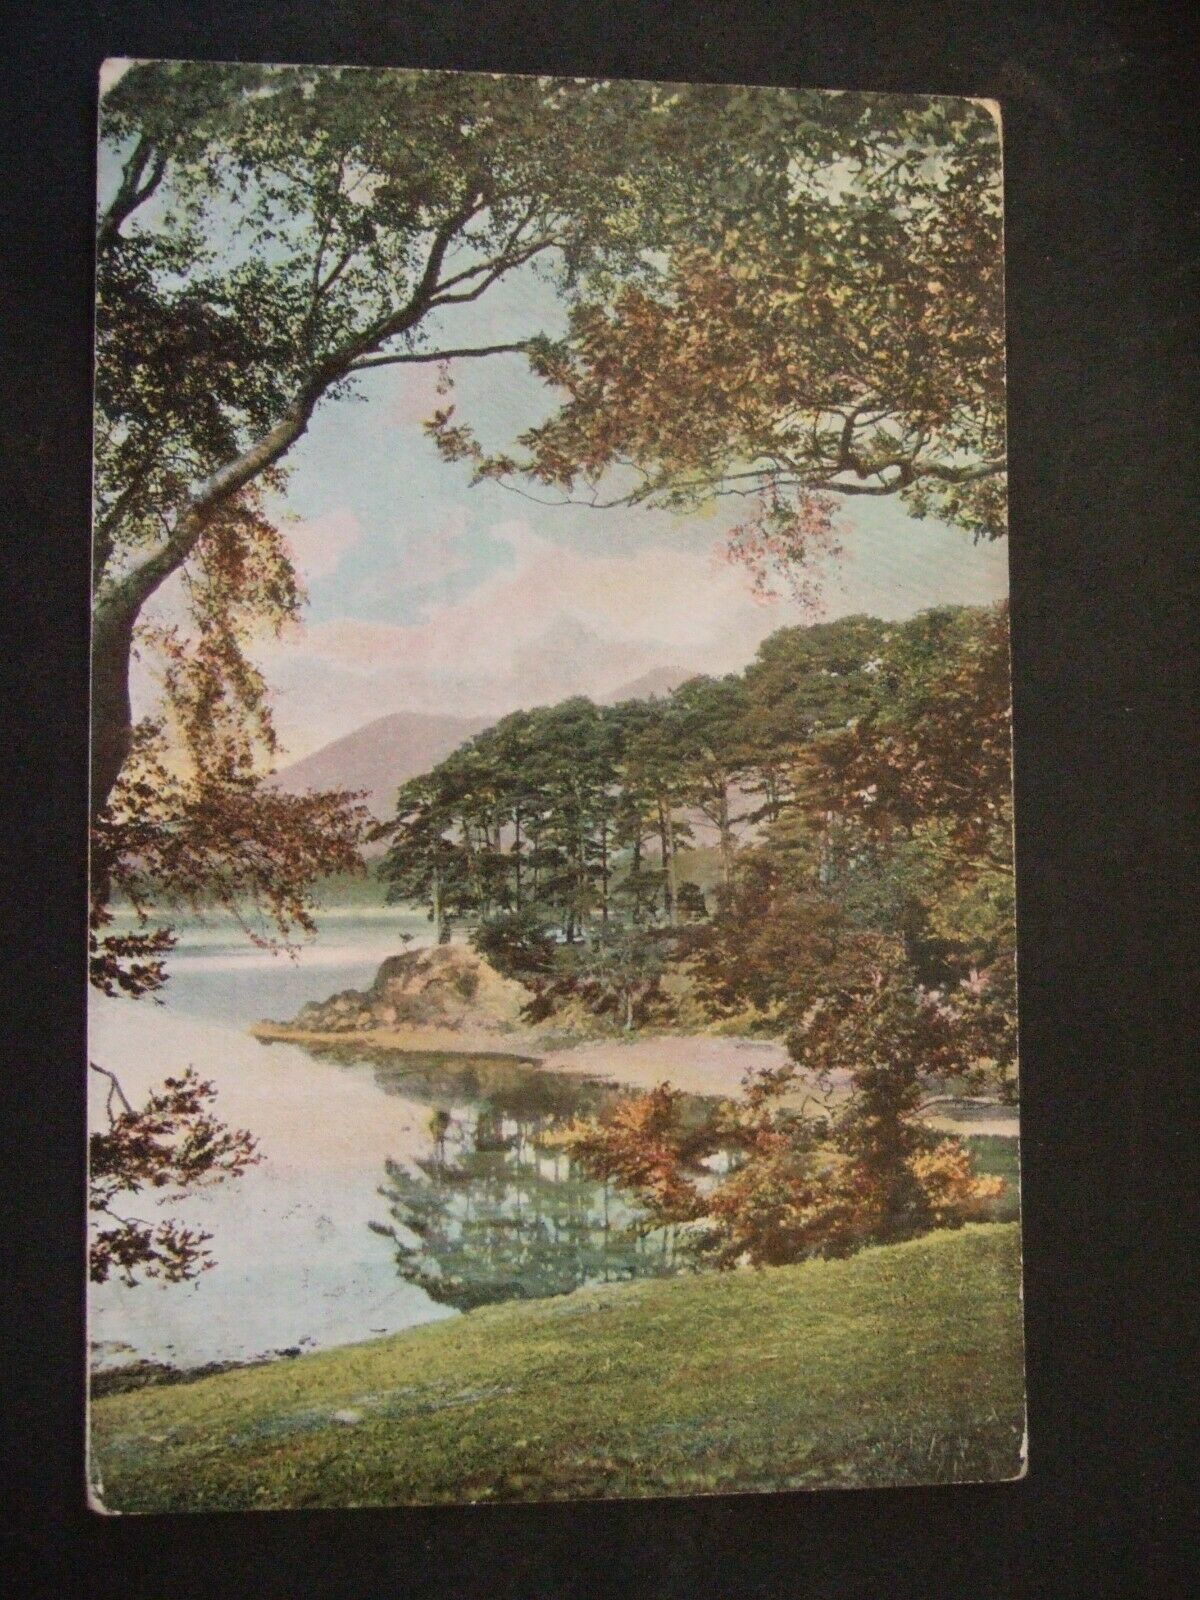 House Clearance - Derwentwater. Peep at Friar's Crag. Posted to "High Briary", Keswick, 1905